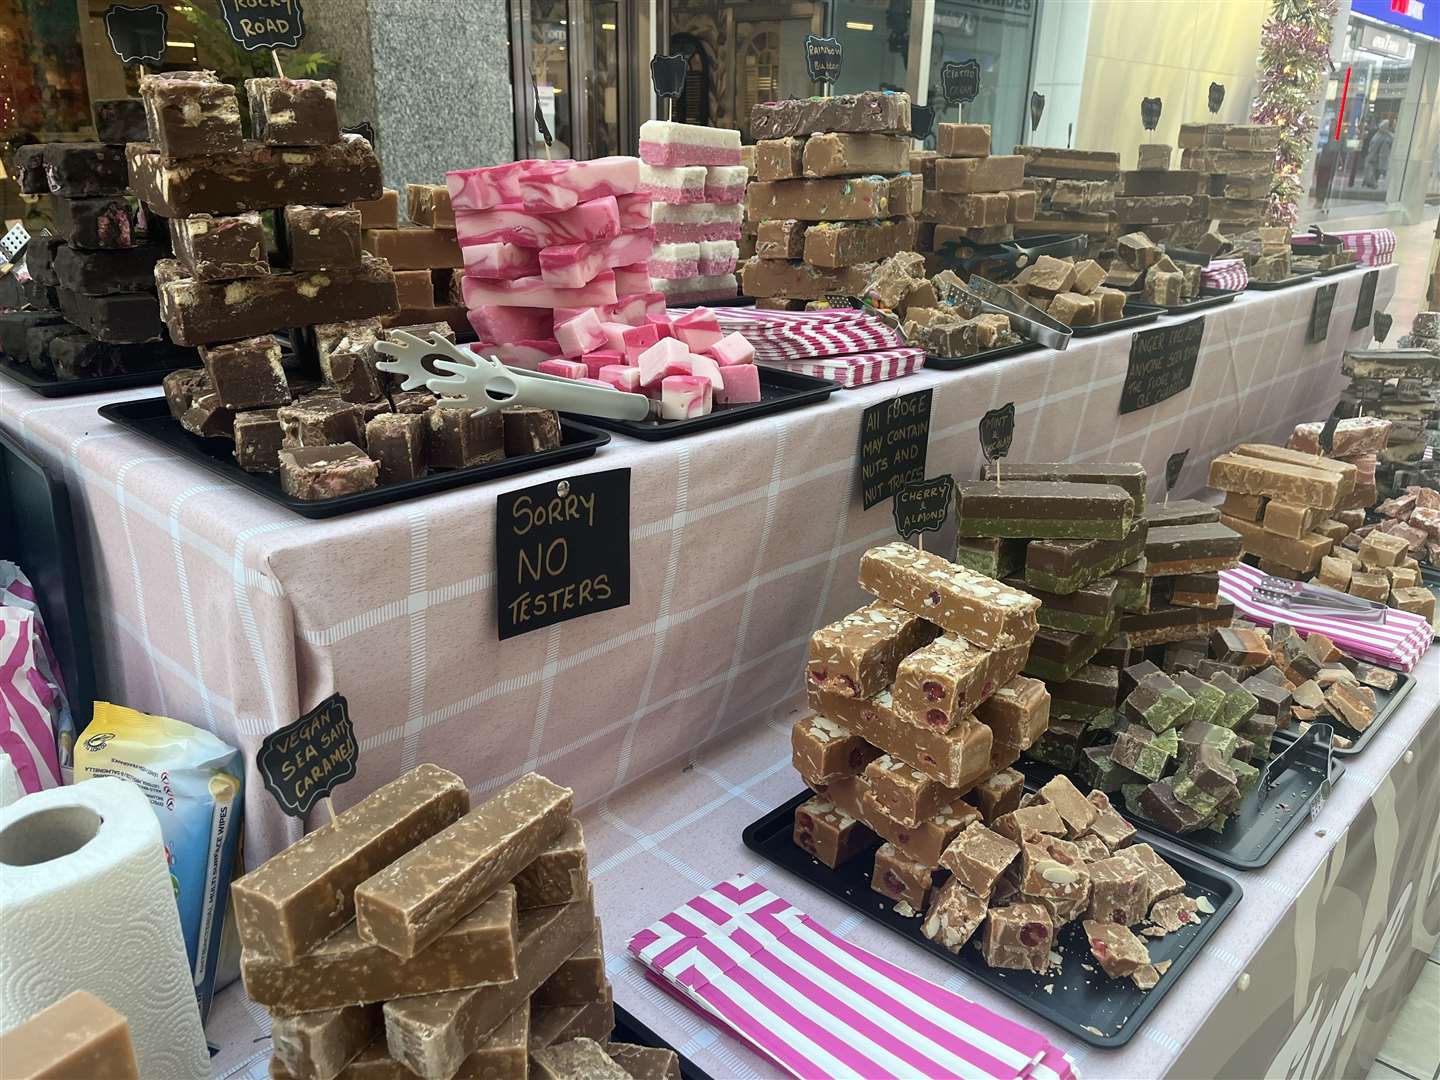 Mince pie-flavoured fudge is available